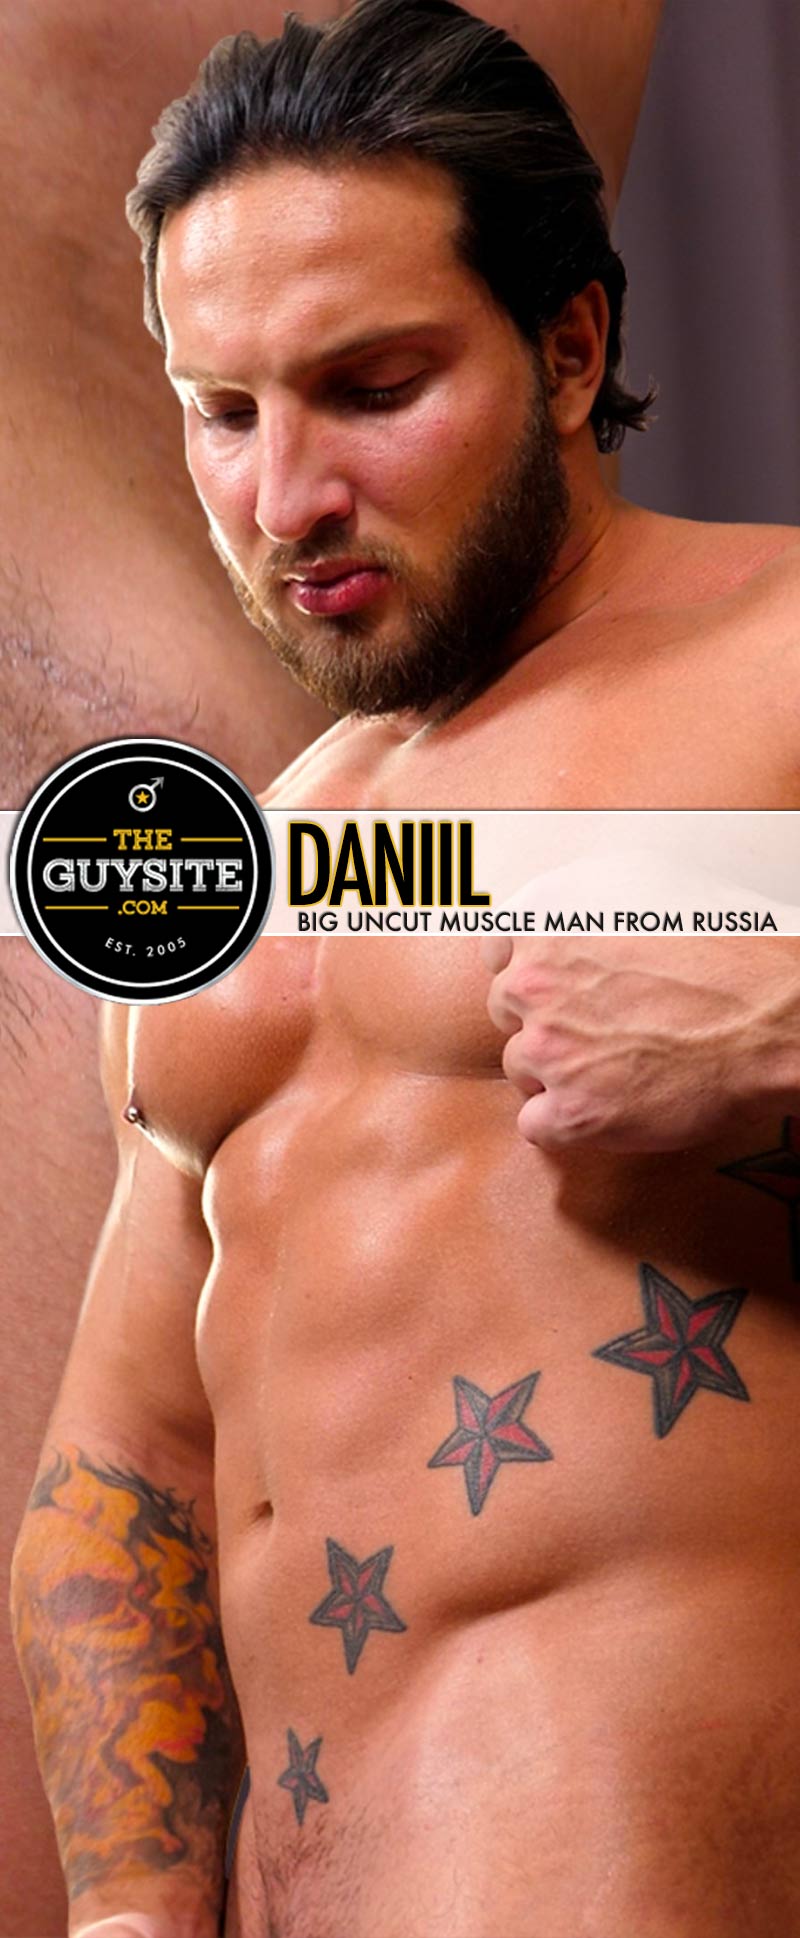 Daniil [Naked Russian Body Builder] at The Guy Site